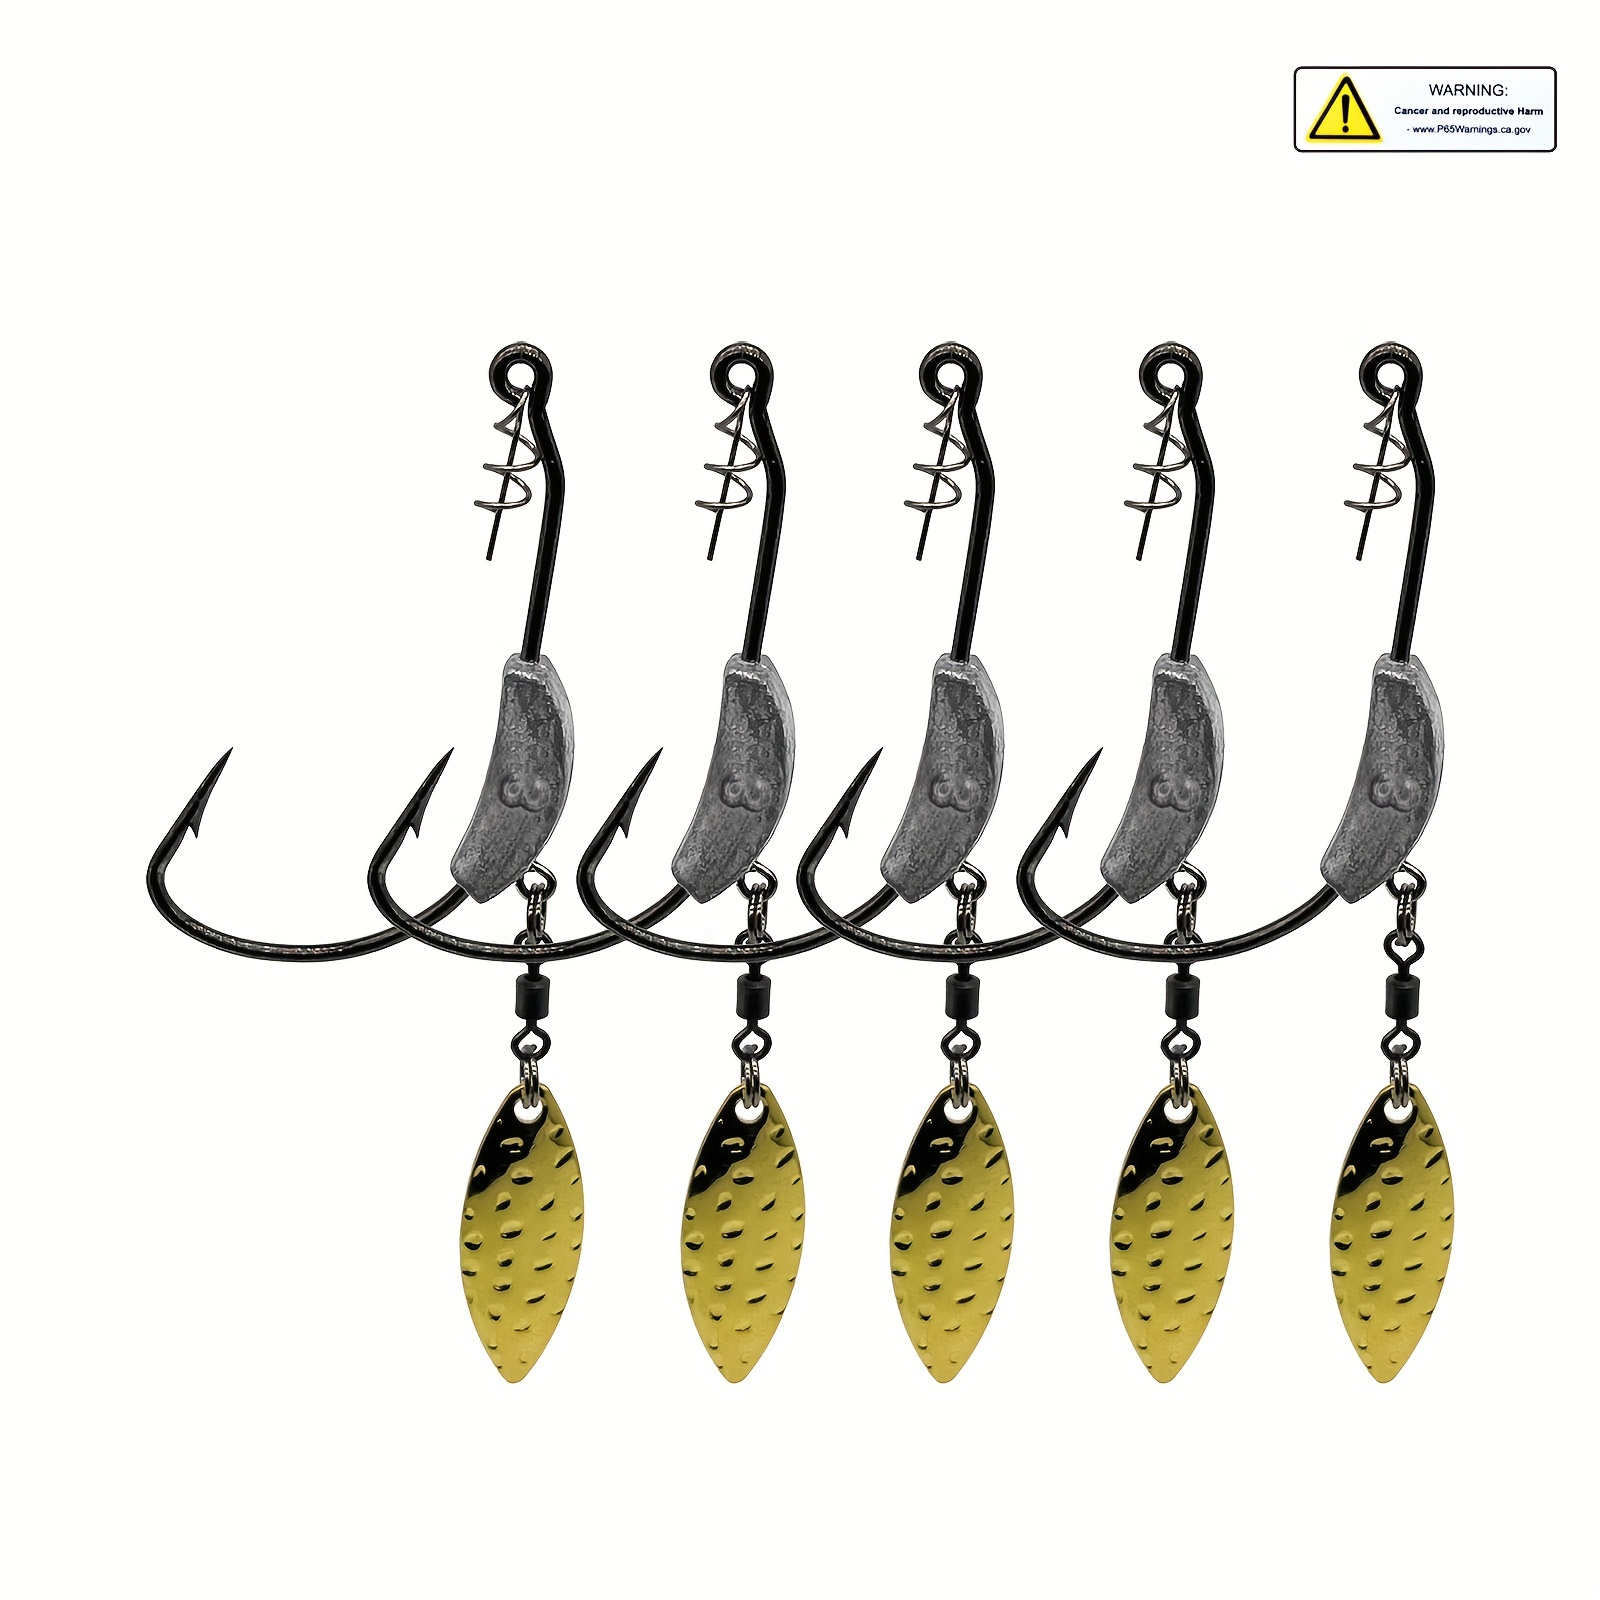 5pcs Weighted Hook With Twist Lock, Spring Hook Swim Bait Fishing Hook With  Twistlock Pin For Soft Lures 0.2oz/ 0.21oz/ 0.26oz/ 0.32oz